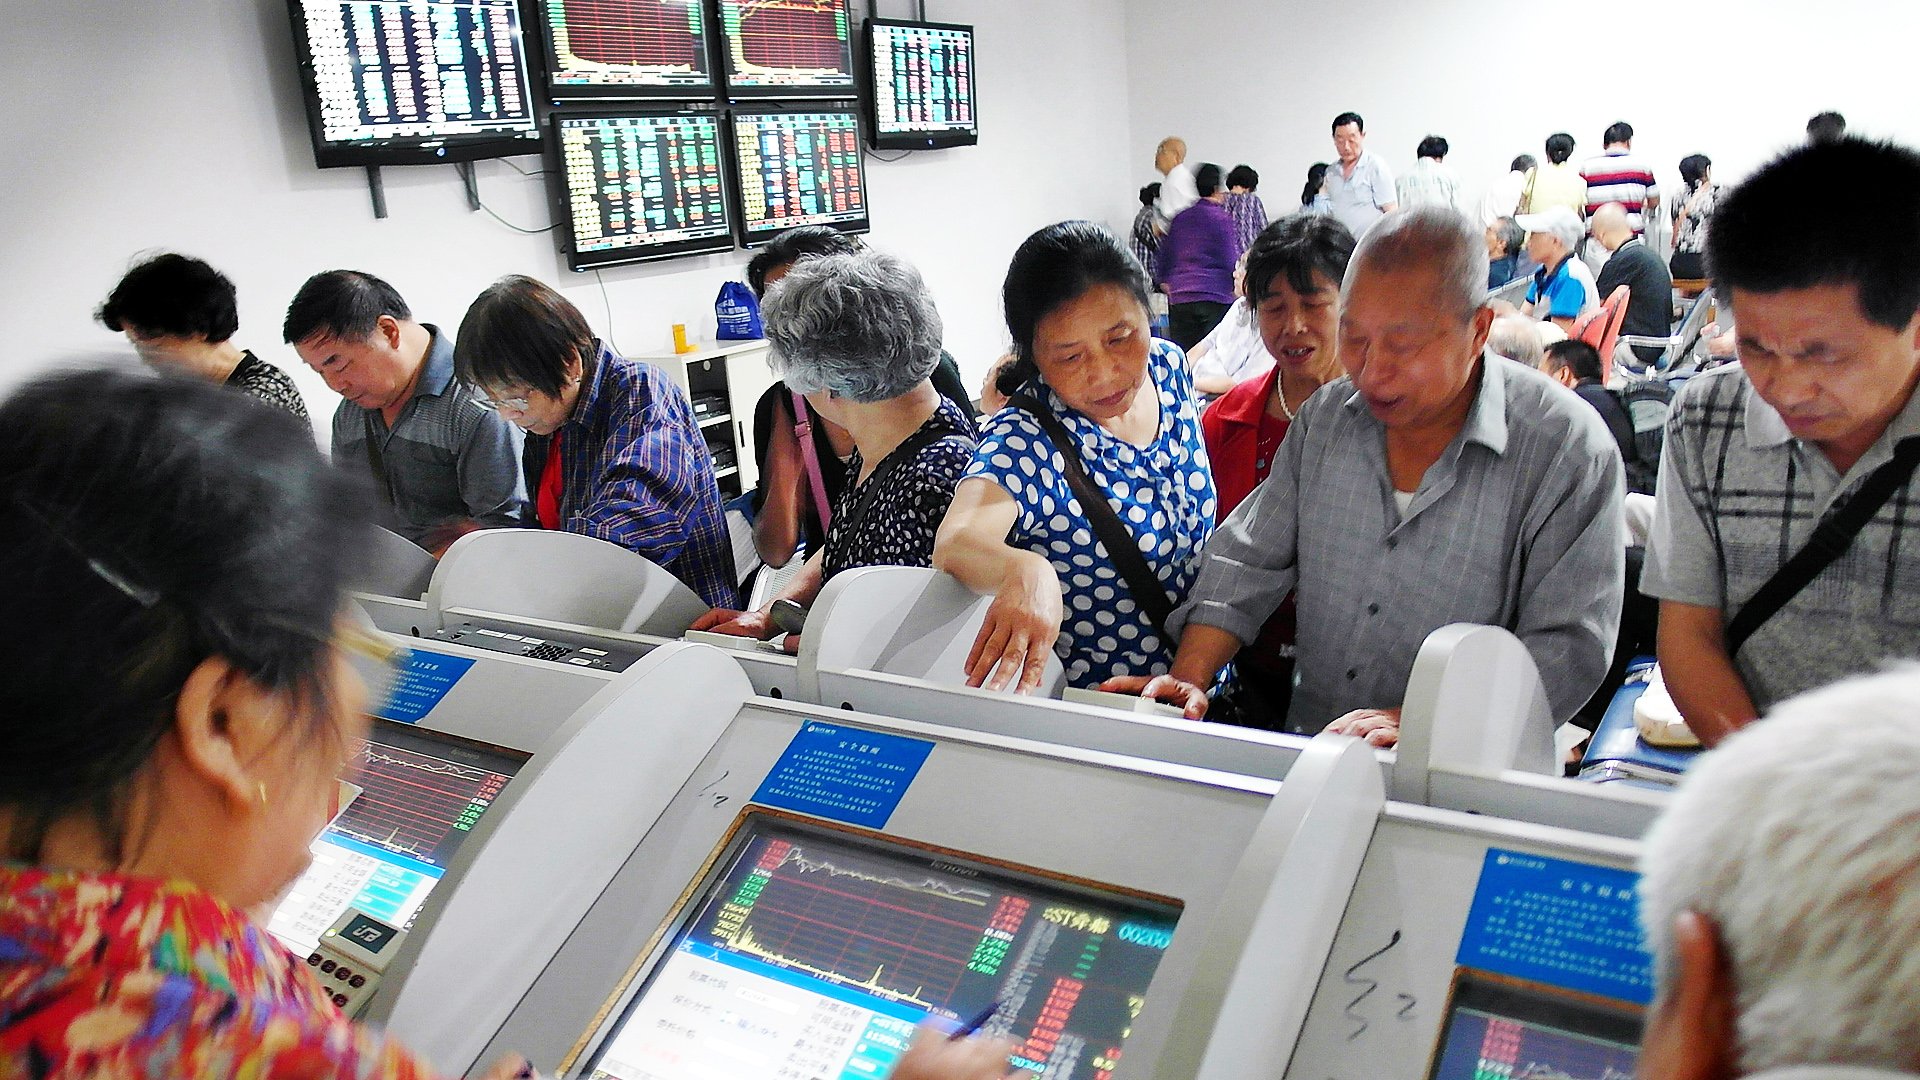 Investors look over stock prices on display terminals at a brokerage house in Yichang, Hubei province. Photo: AP